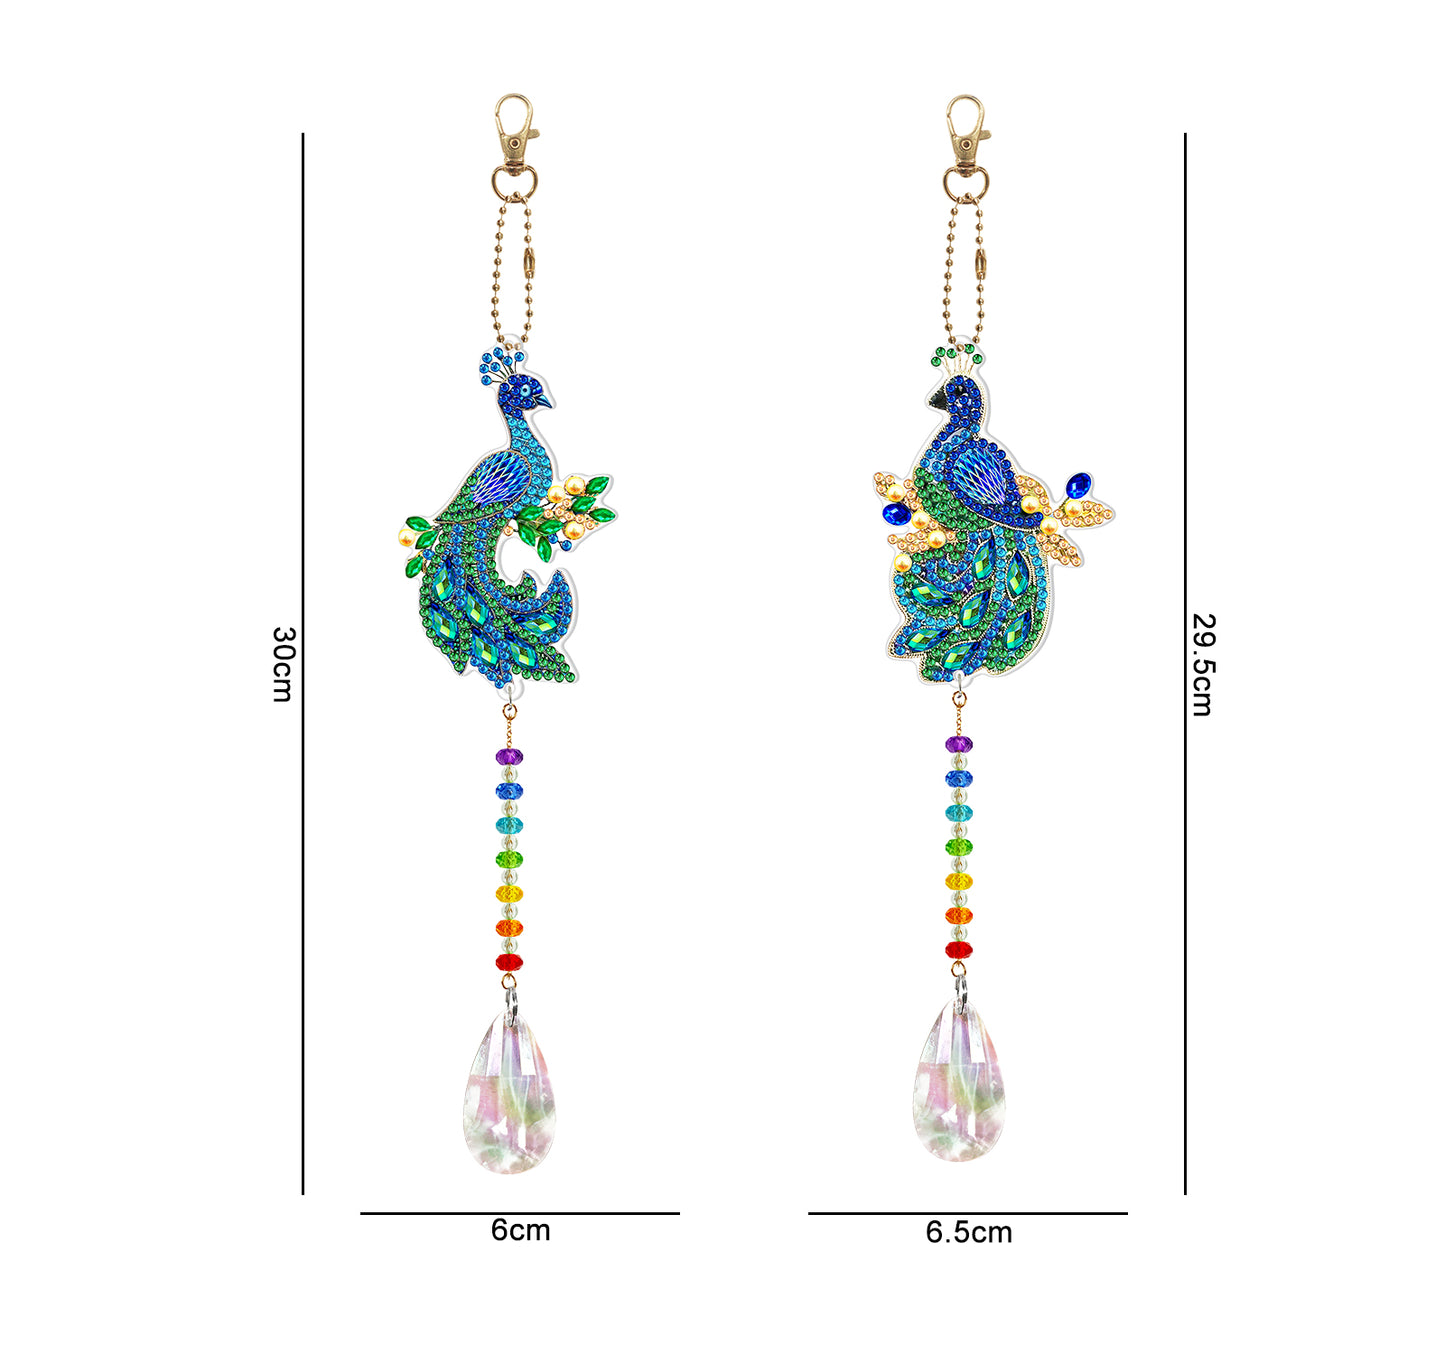 2pcs Special Shaped Crystal Wind Chimes